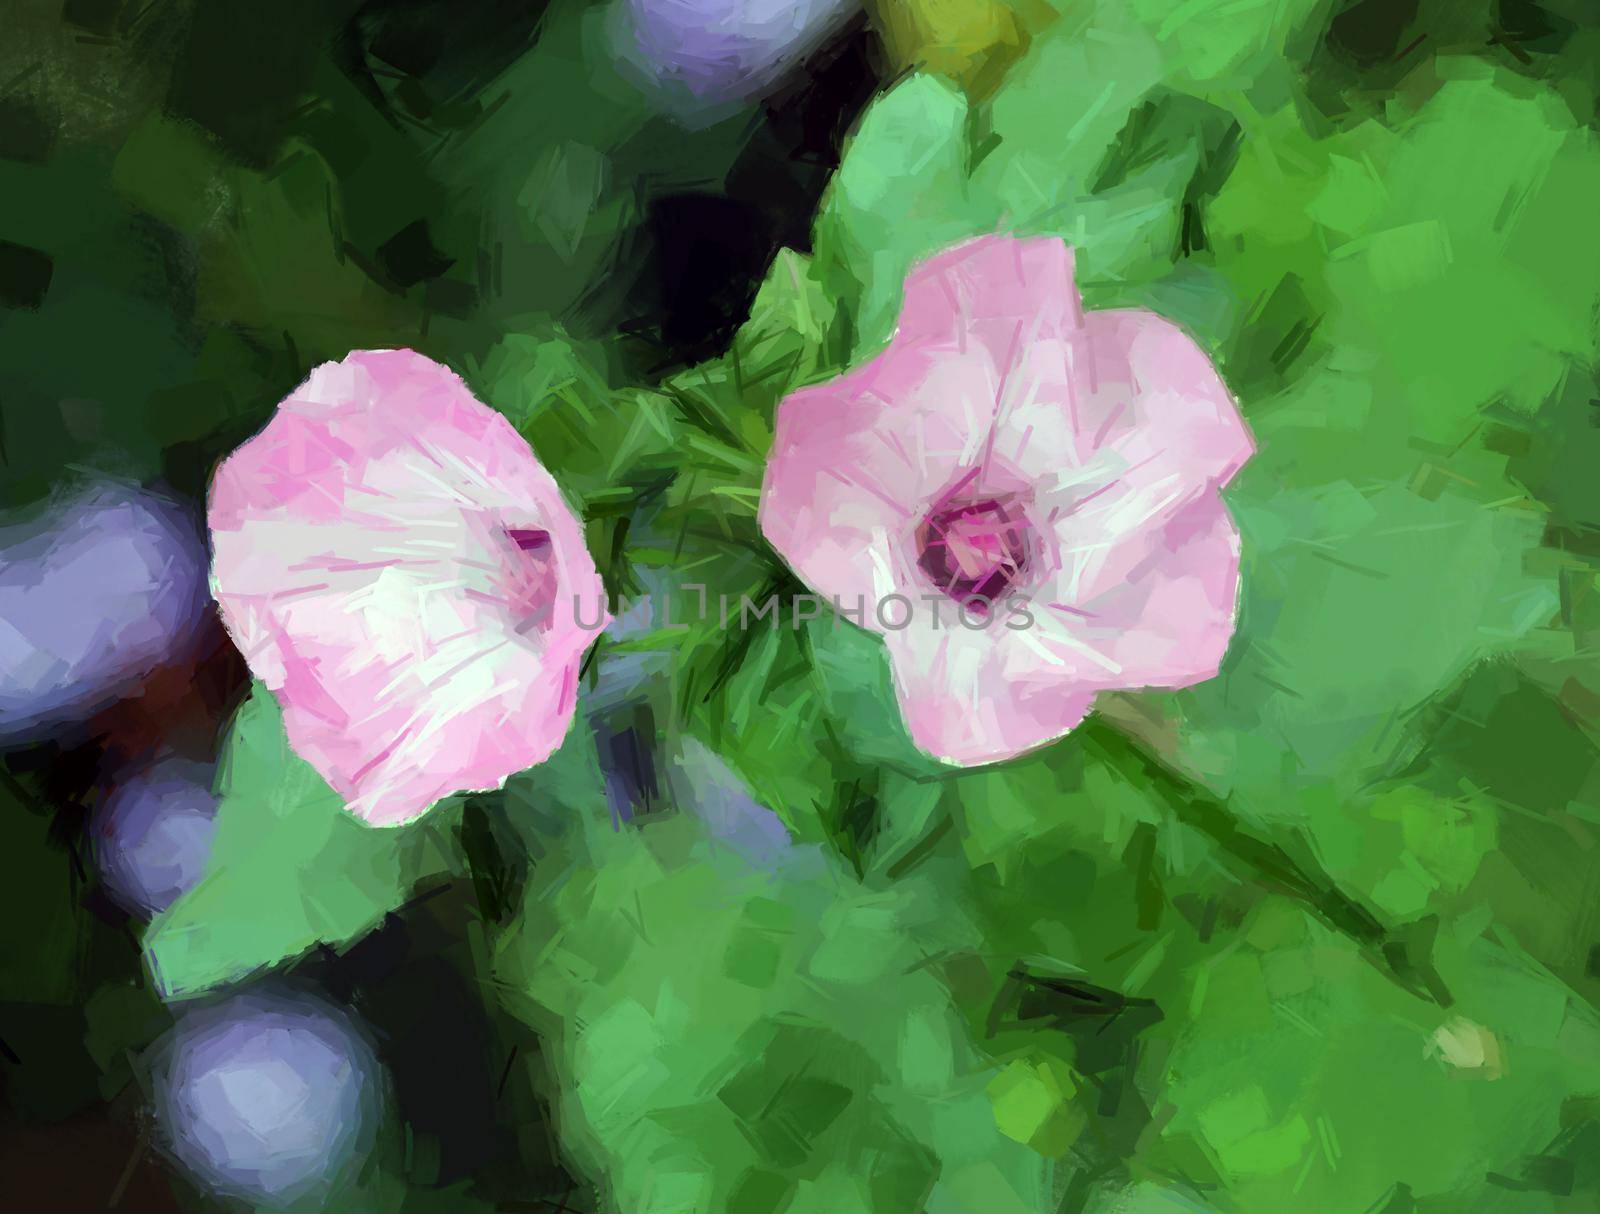 Digital painting composition with purple flowers